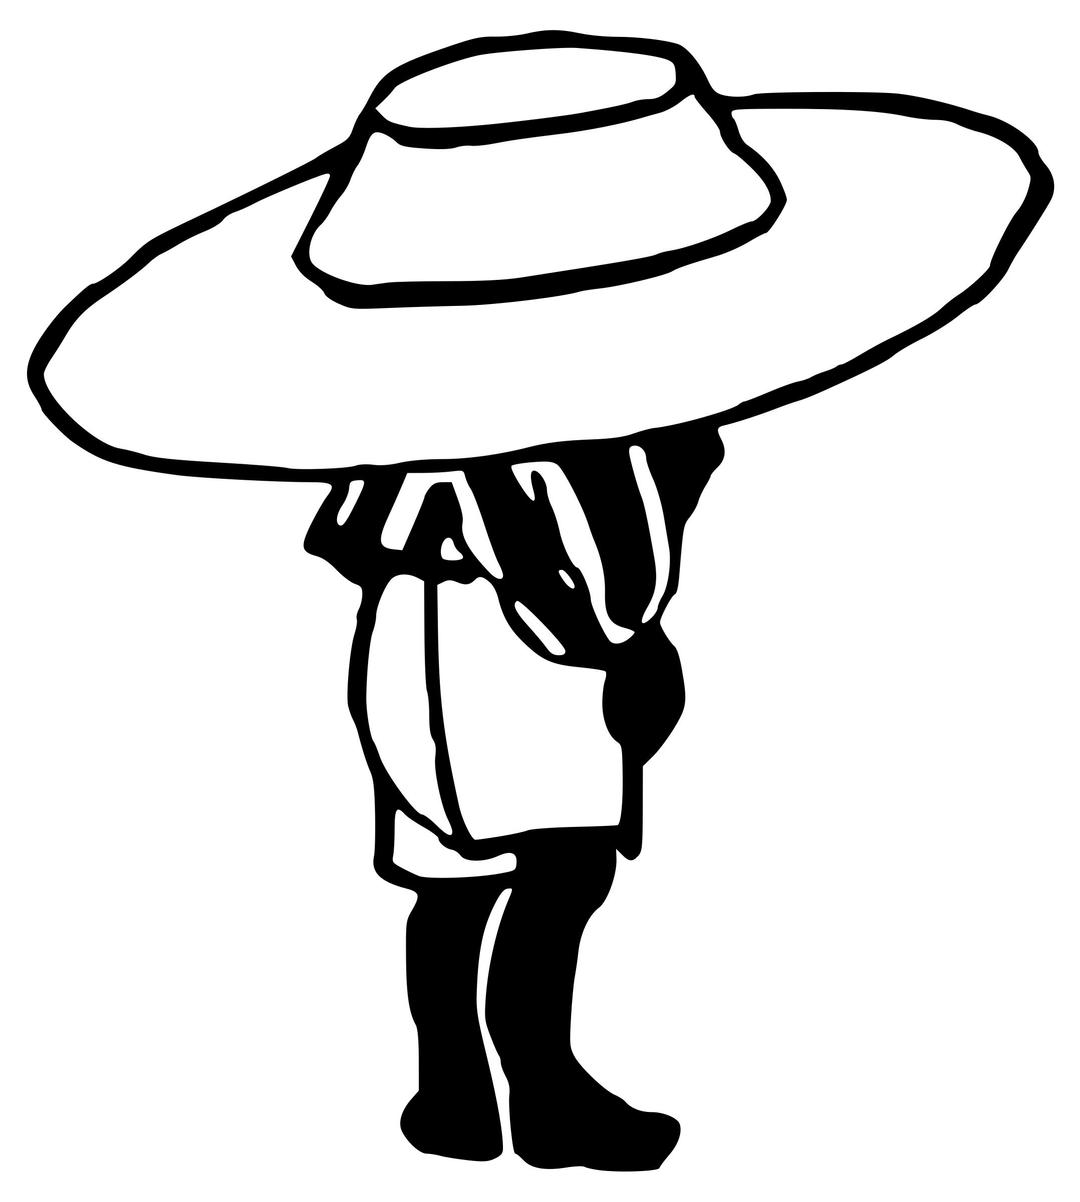 Child with large hat png transparent